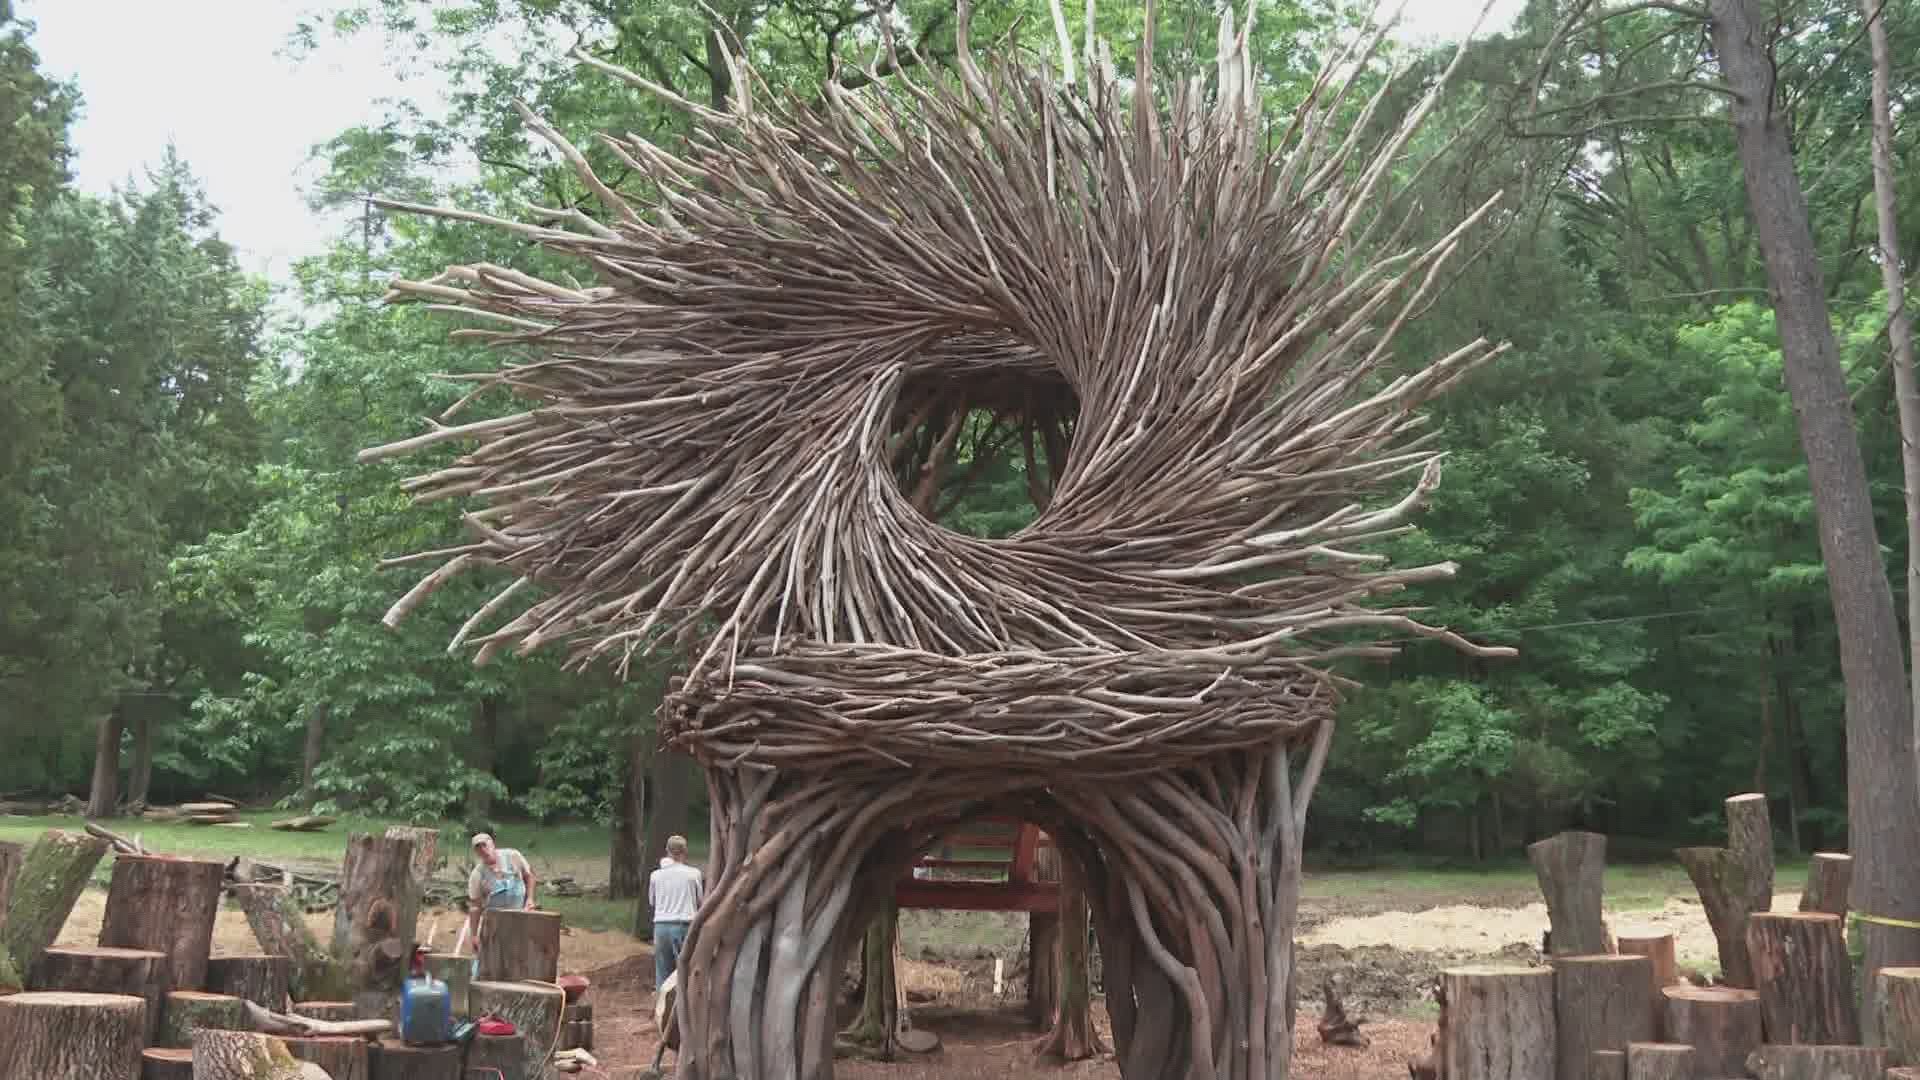 The trolls at Bernheim Forest have something new to look at in the trees and it's a human-sized nest.